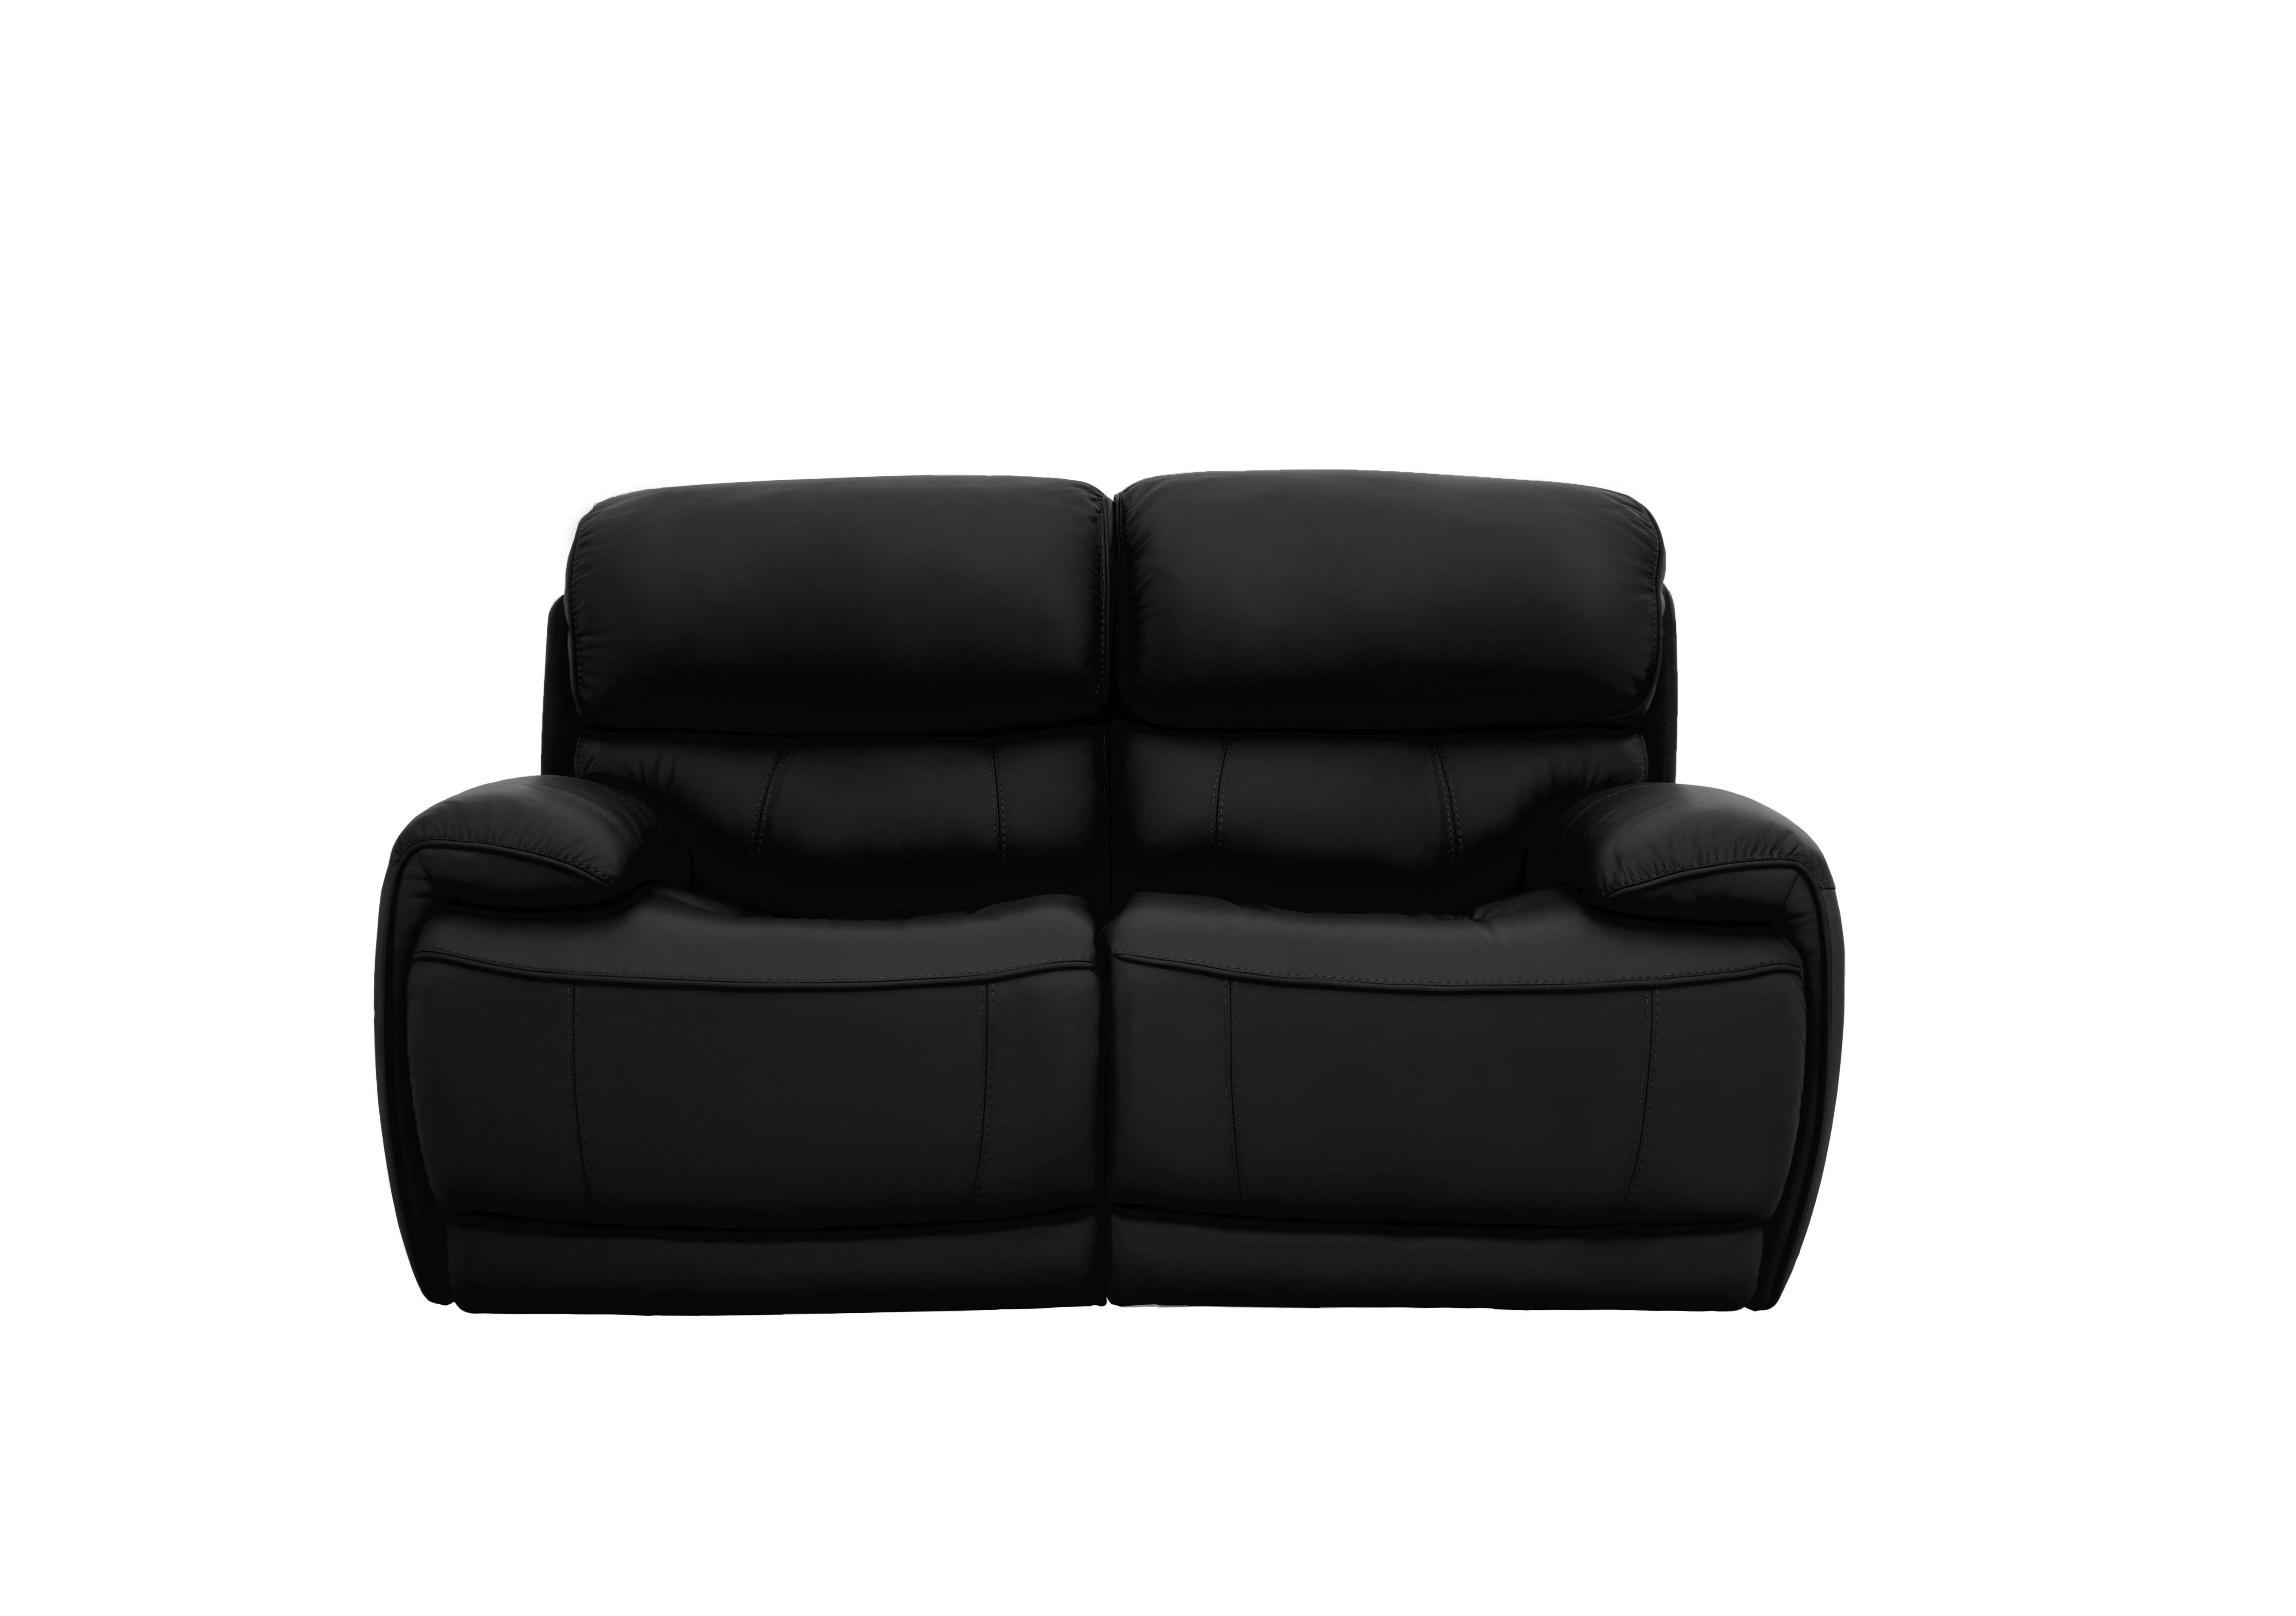 Rocco 2 Seater Leather Power Rocker Sofa with Power Headrests in Bv-3500 Classic Black on Furniture Village